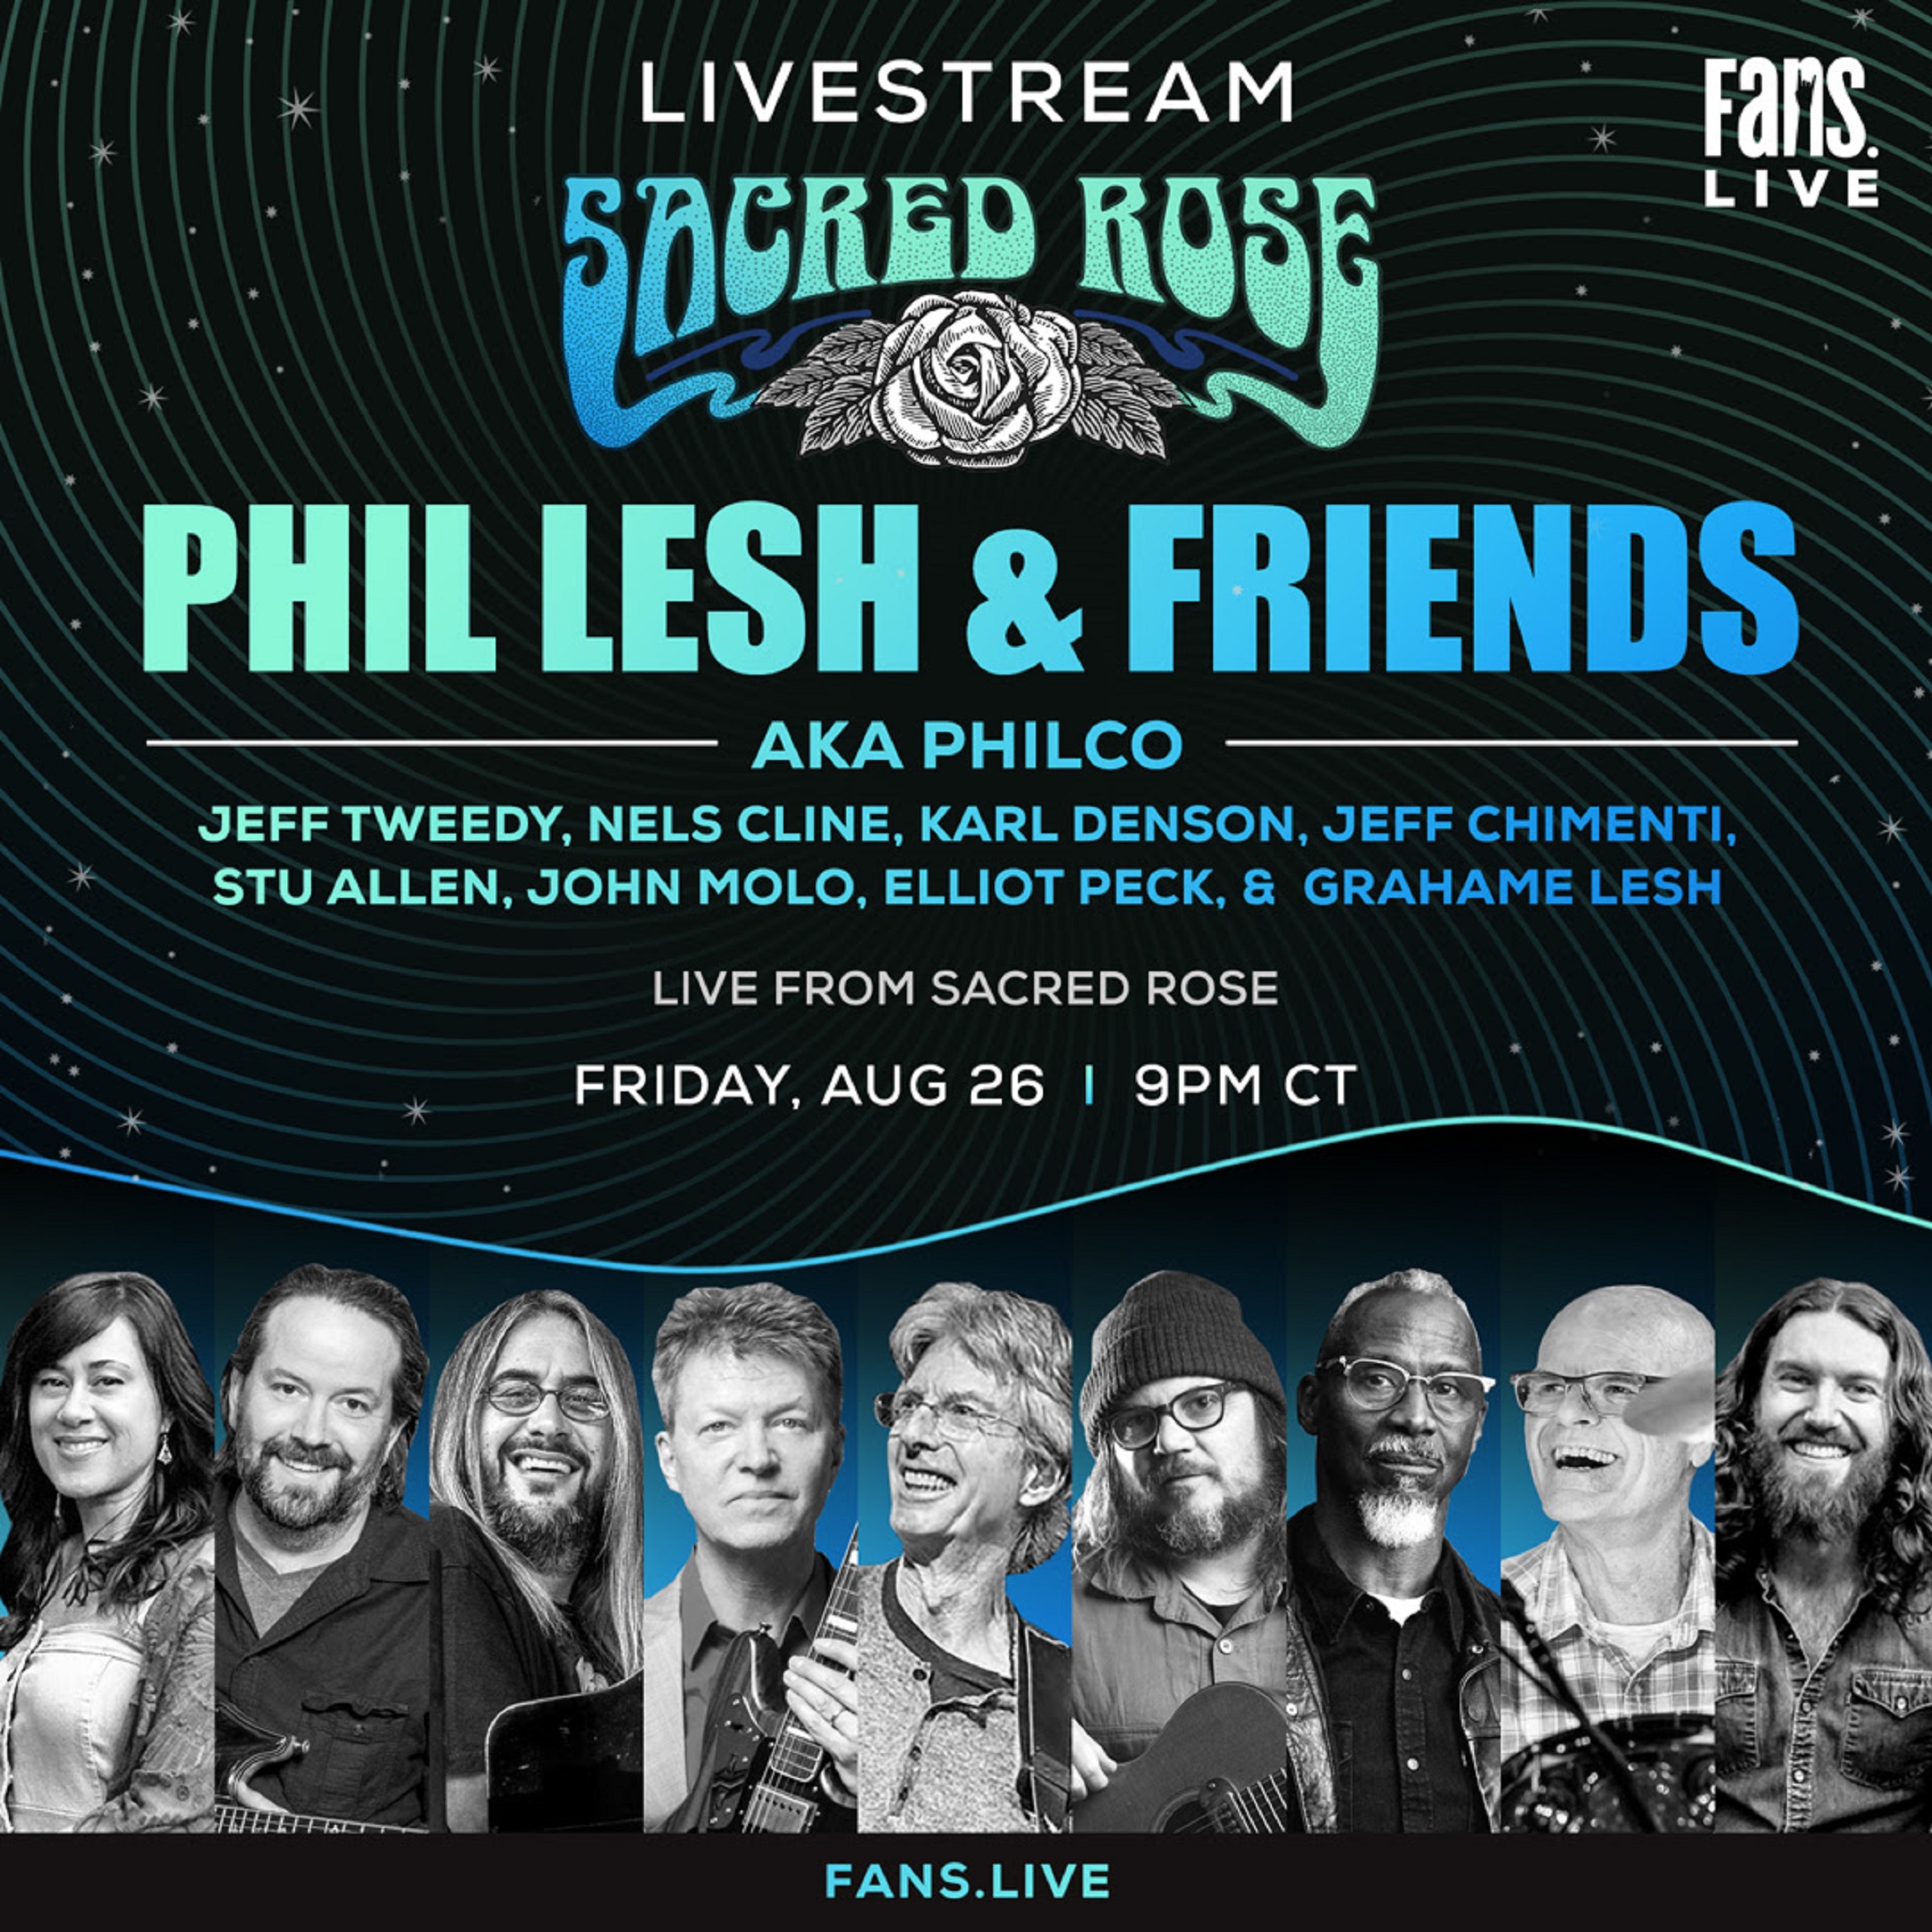 SACRED ROSE FESTIVAL PPV Live Stream with Phil Lesh & Friends (aka PHILCO w Wilco's Jeff Tweedy, Nels Cline) Tonight, August 26 and Joe Russo's Almost Dead Sunday, August 28